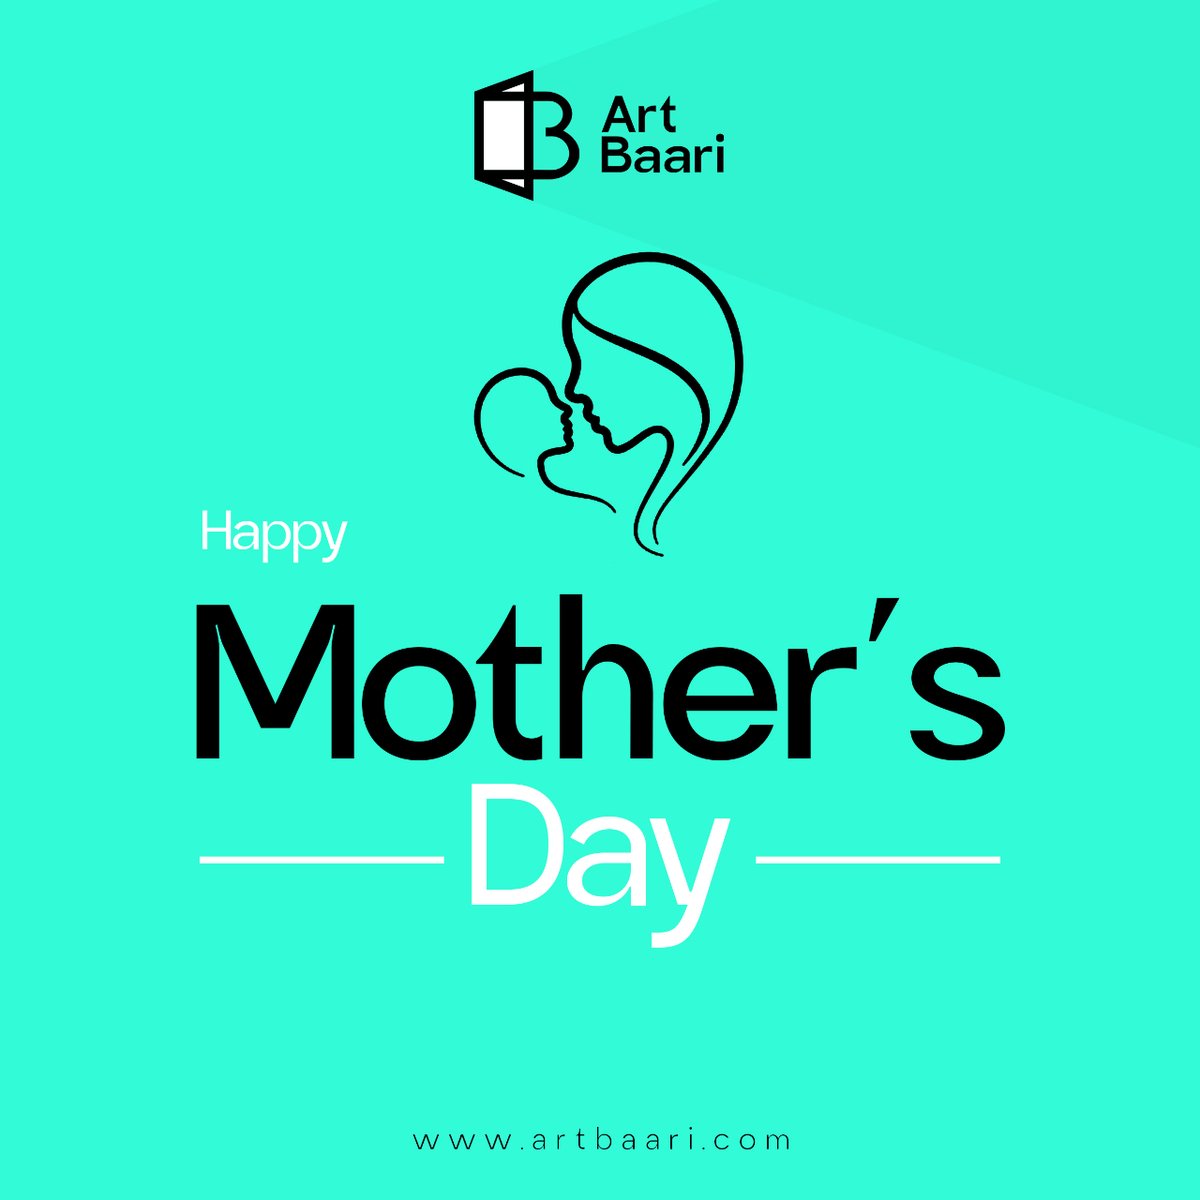 Mom, I could never put into words how much you mean to me. You're my guiding light, my biggest supporter, and the strongest woman I know. Happy Mother's Day to the one who holds my heart.
#MothersDay
#BestMom
#Mama
#artbaari #baari